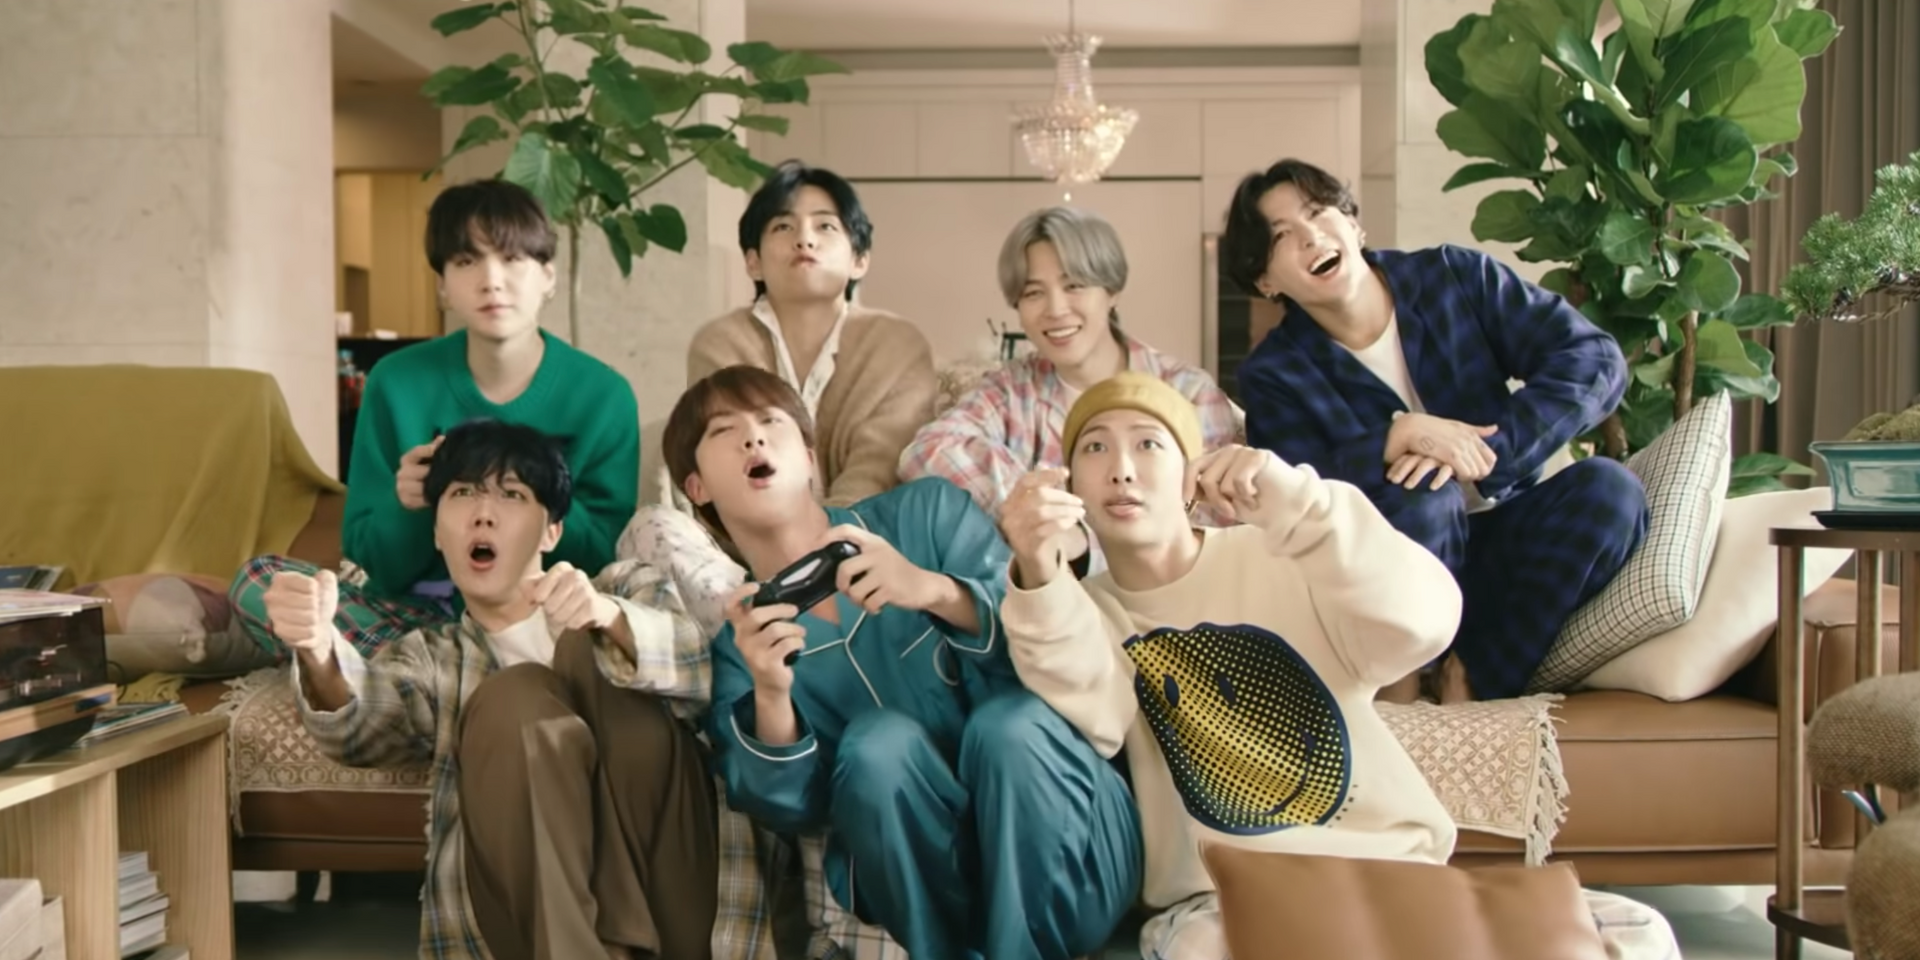 Bts Announce Tiktok Challenge For Army Version Of The Life Goes On